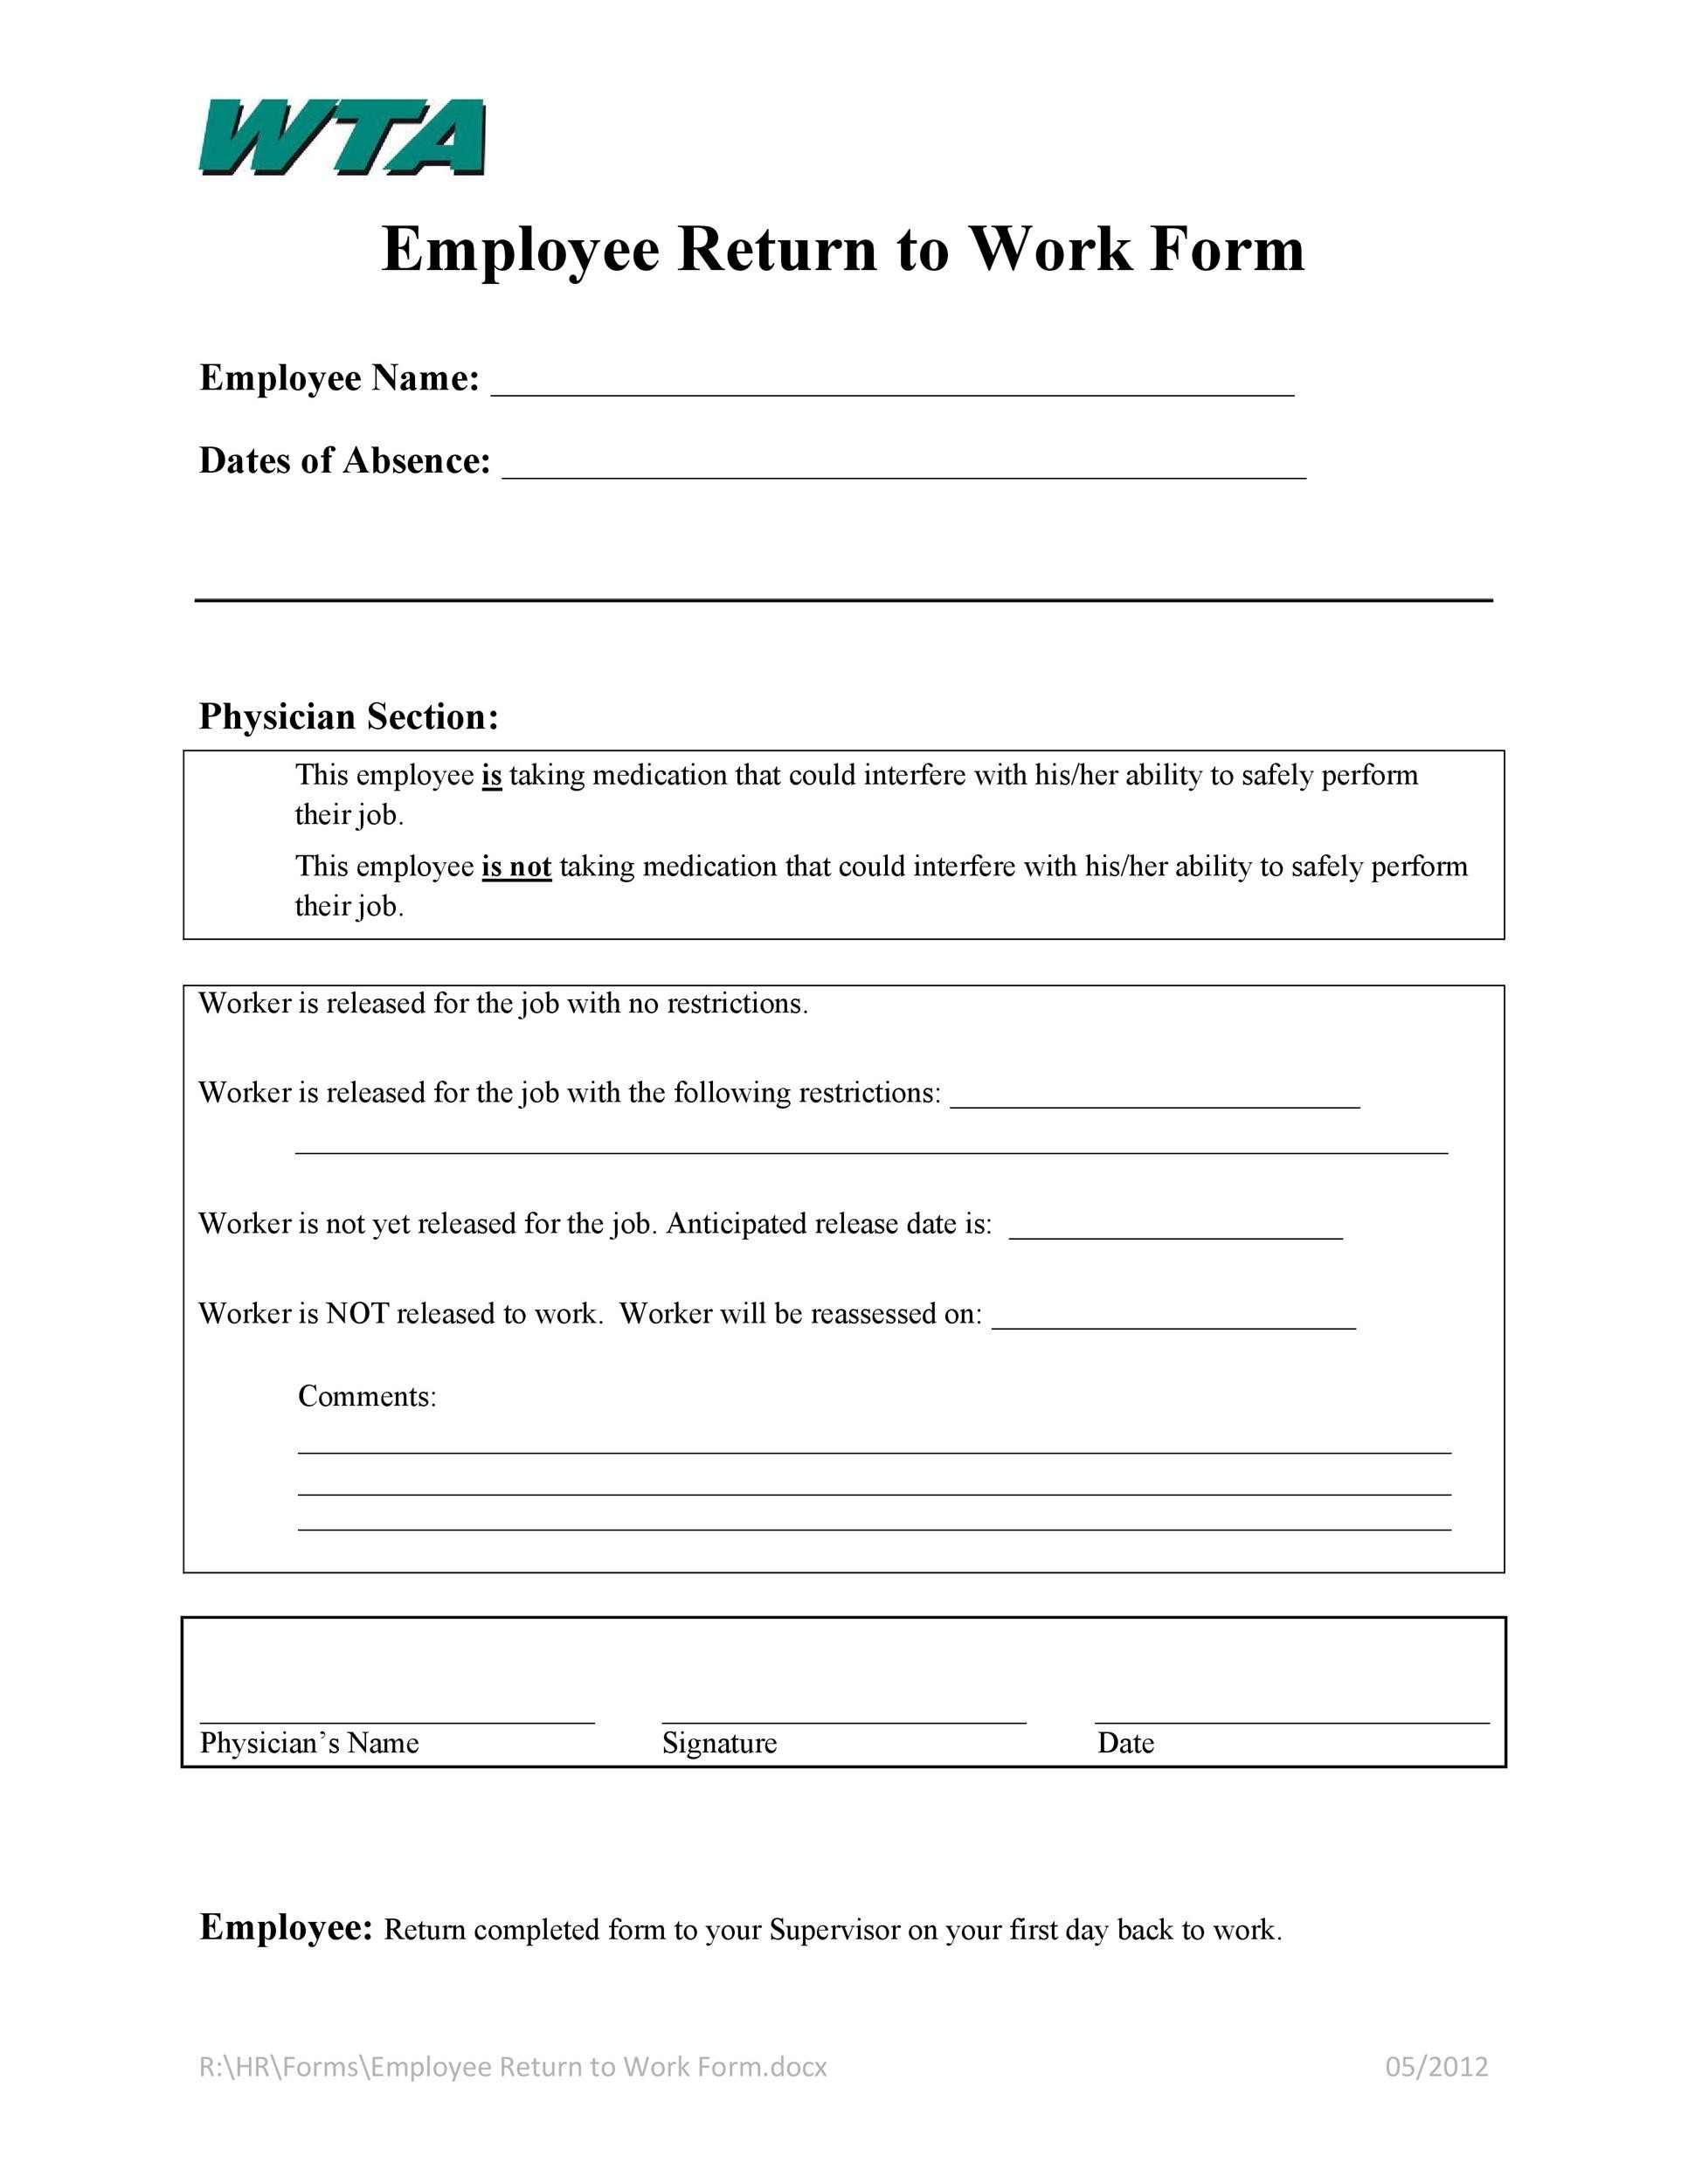 printable-back-to-work-forms-printable-forms-free-online